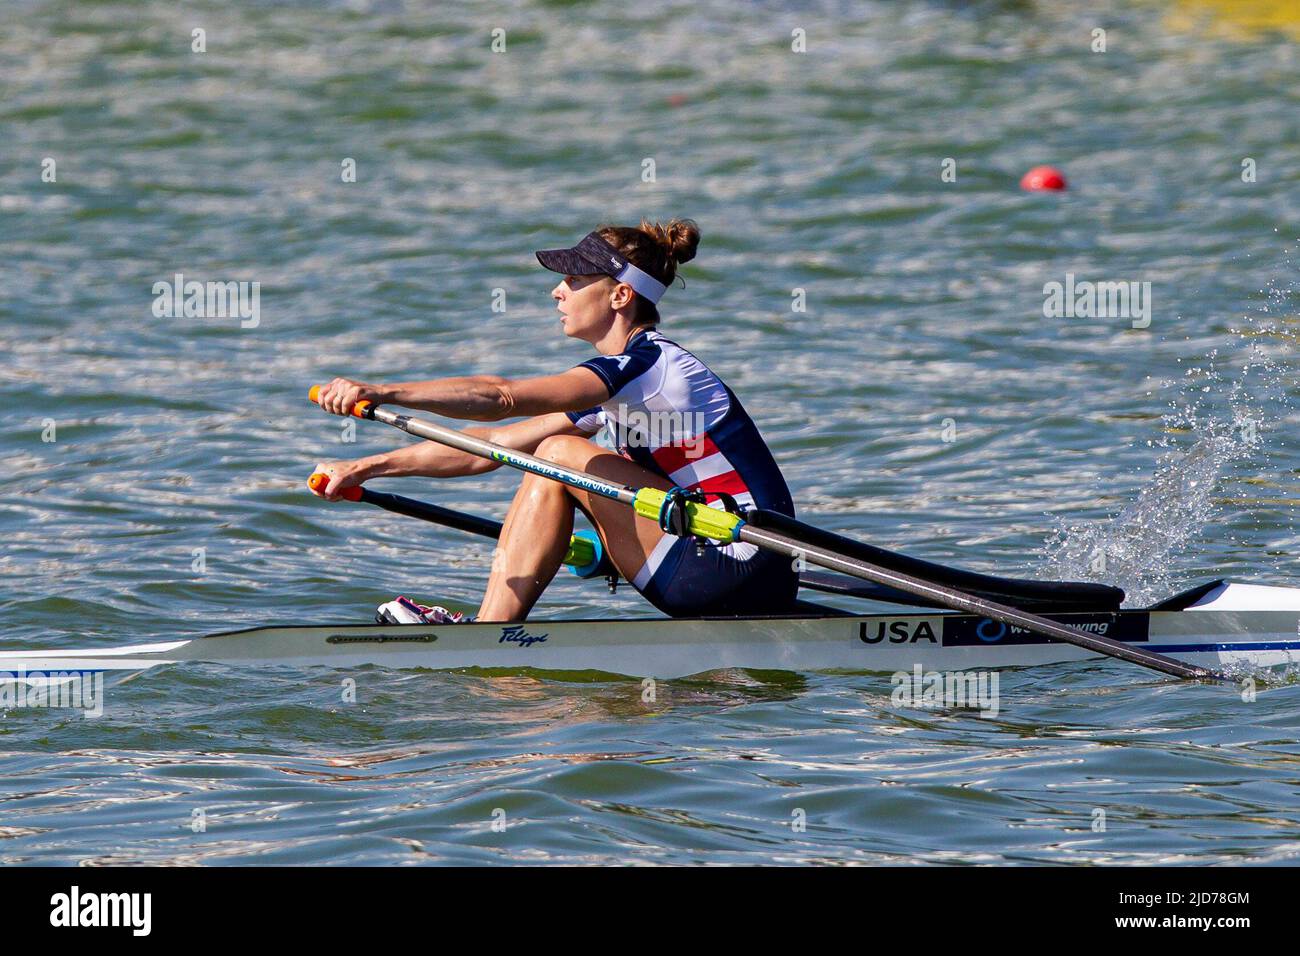 Poznan, Poland. 18th June, 2022. Mary Jones of the United States competes  during Lightweight Women's Single Sculls final of the 2022 World Rowing Cup  II on Lake Malta in Poznan, Poland, June